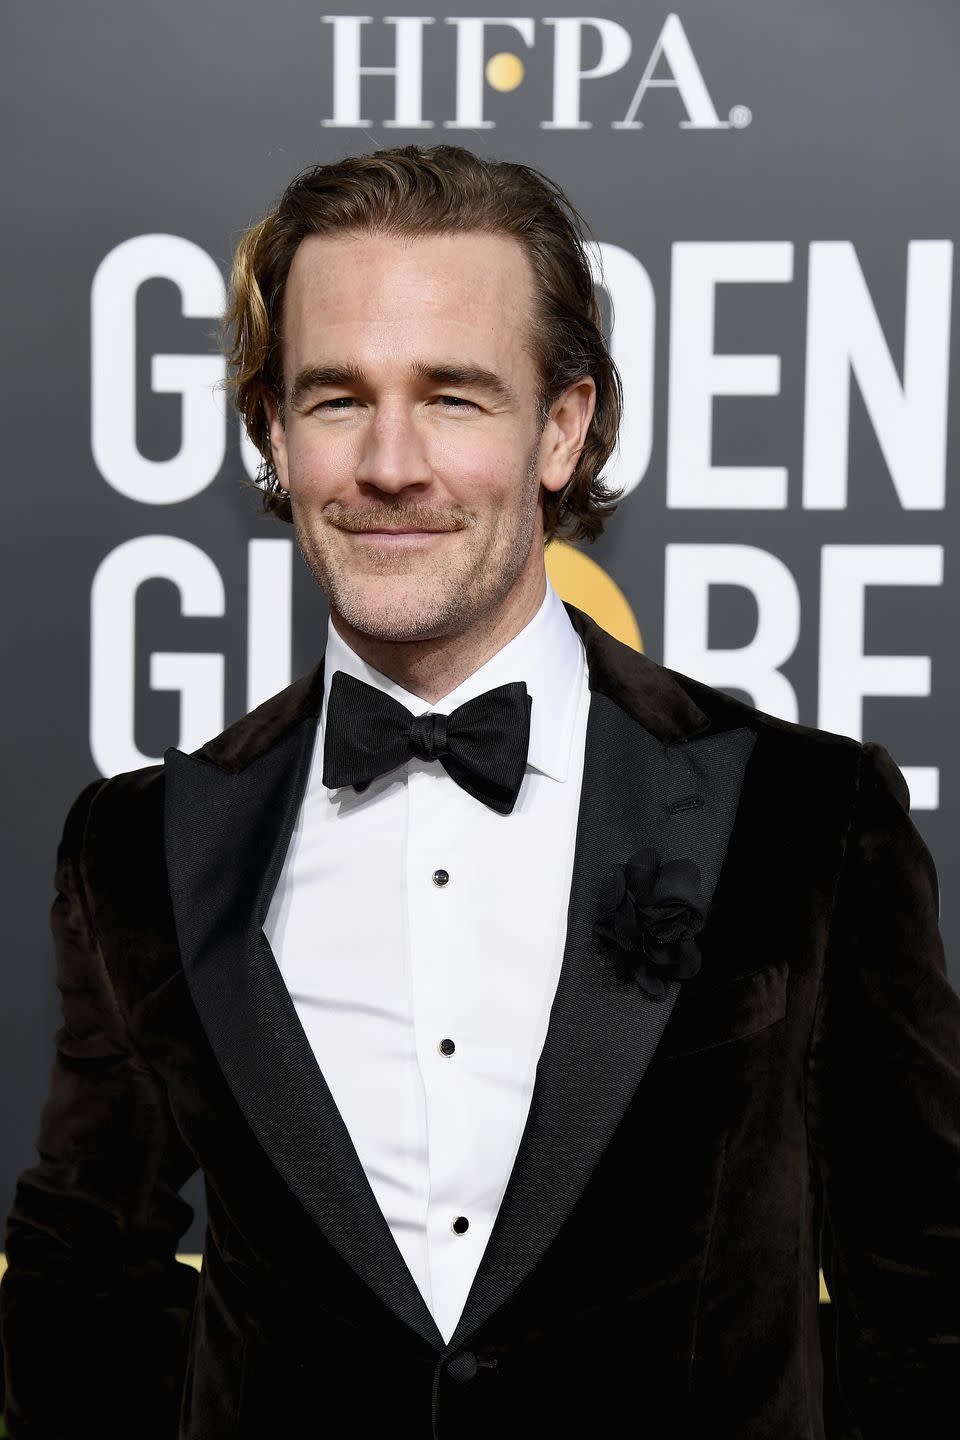 <p>Van Der Beek and his great eyebrows are still making Hollywood moves. He had a role on the hit FX show <em>Pose</em>, and played DJ Diplo in the comedy series <em>What Would Diplo Do?</em> over on Viceland. </p>